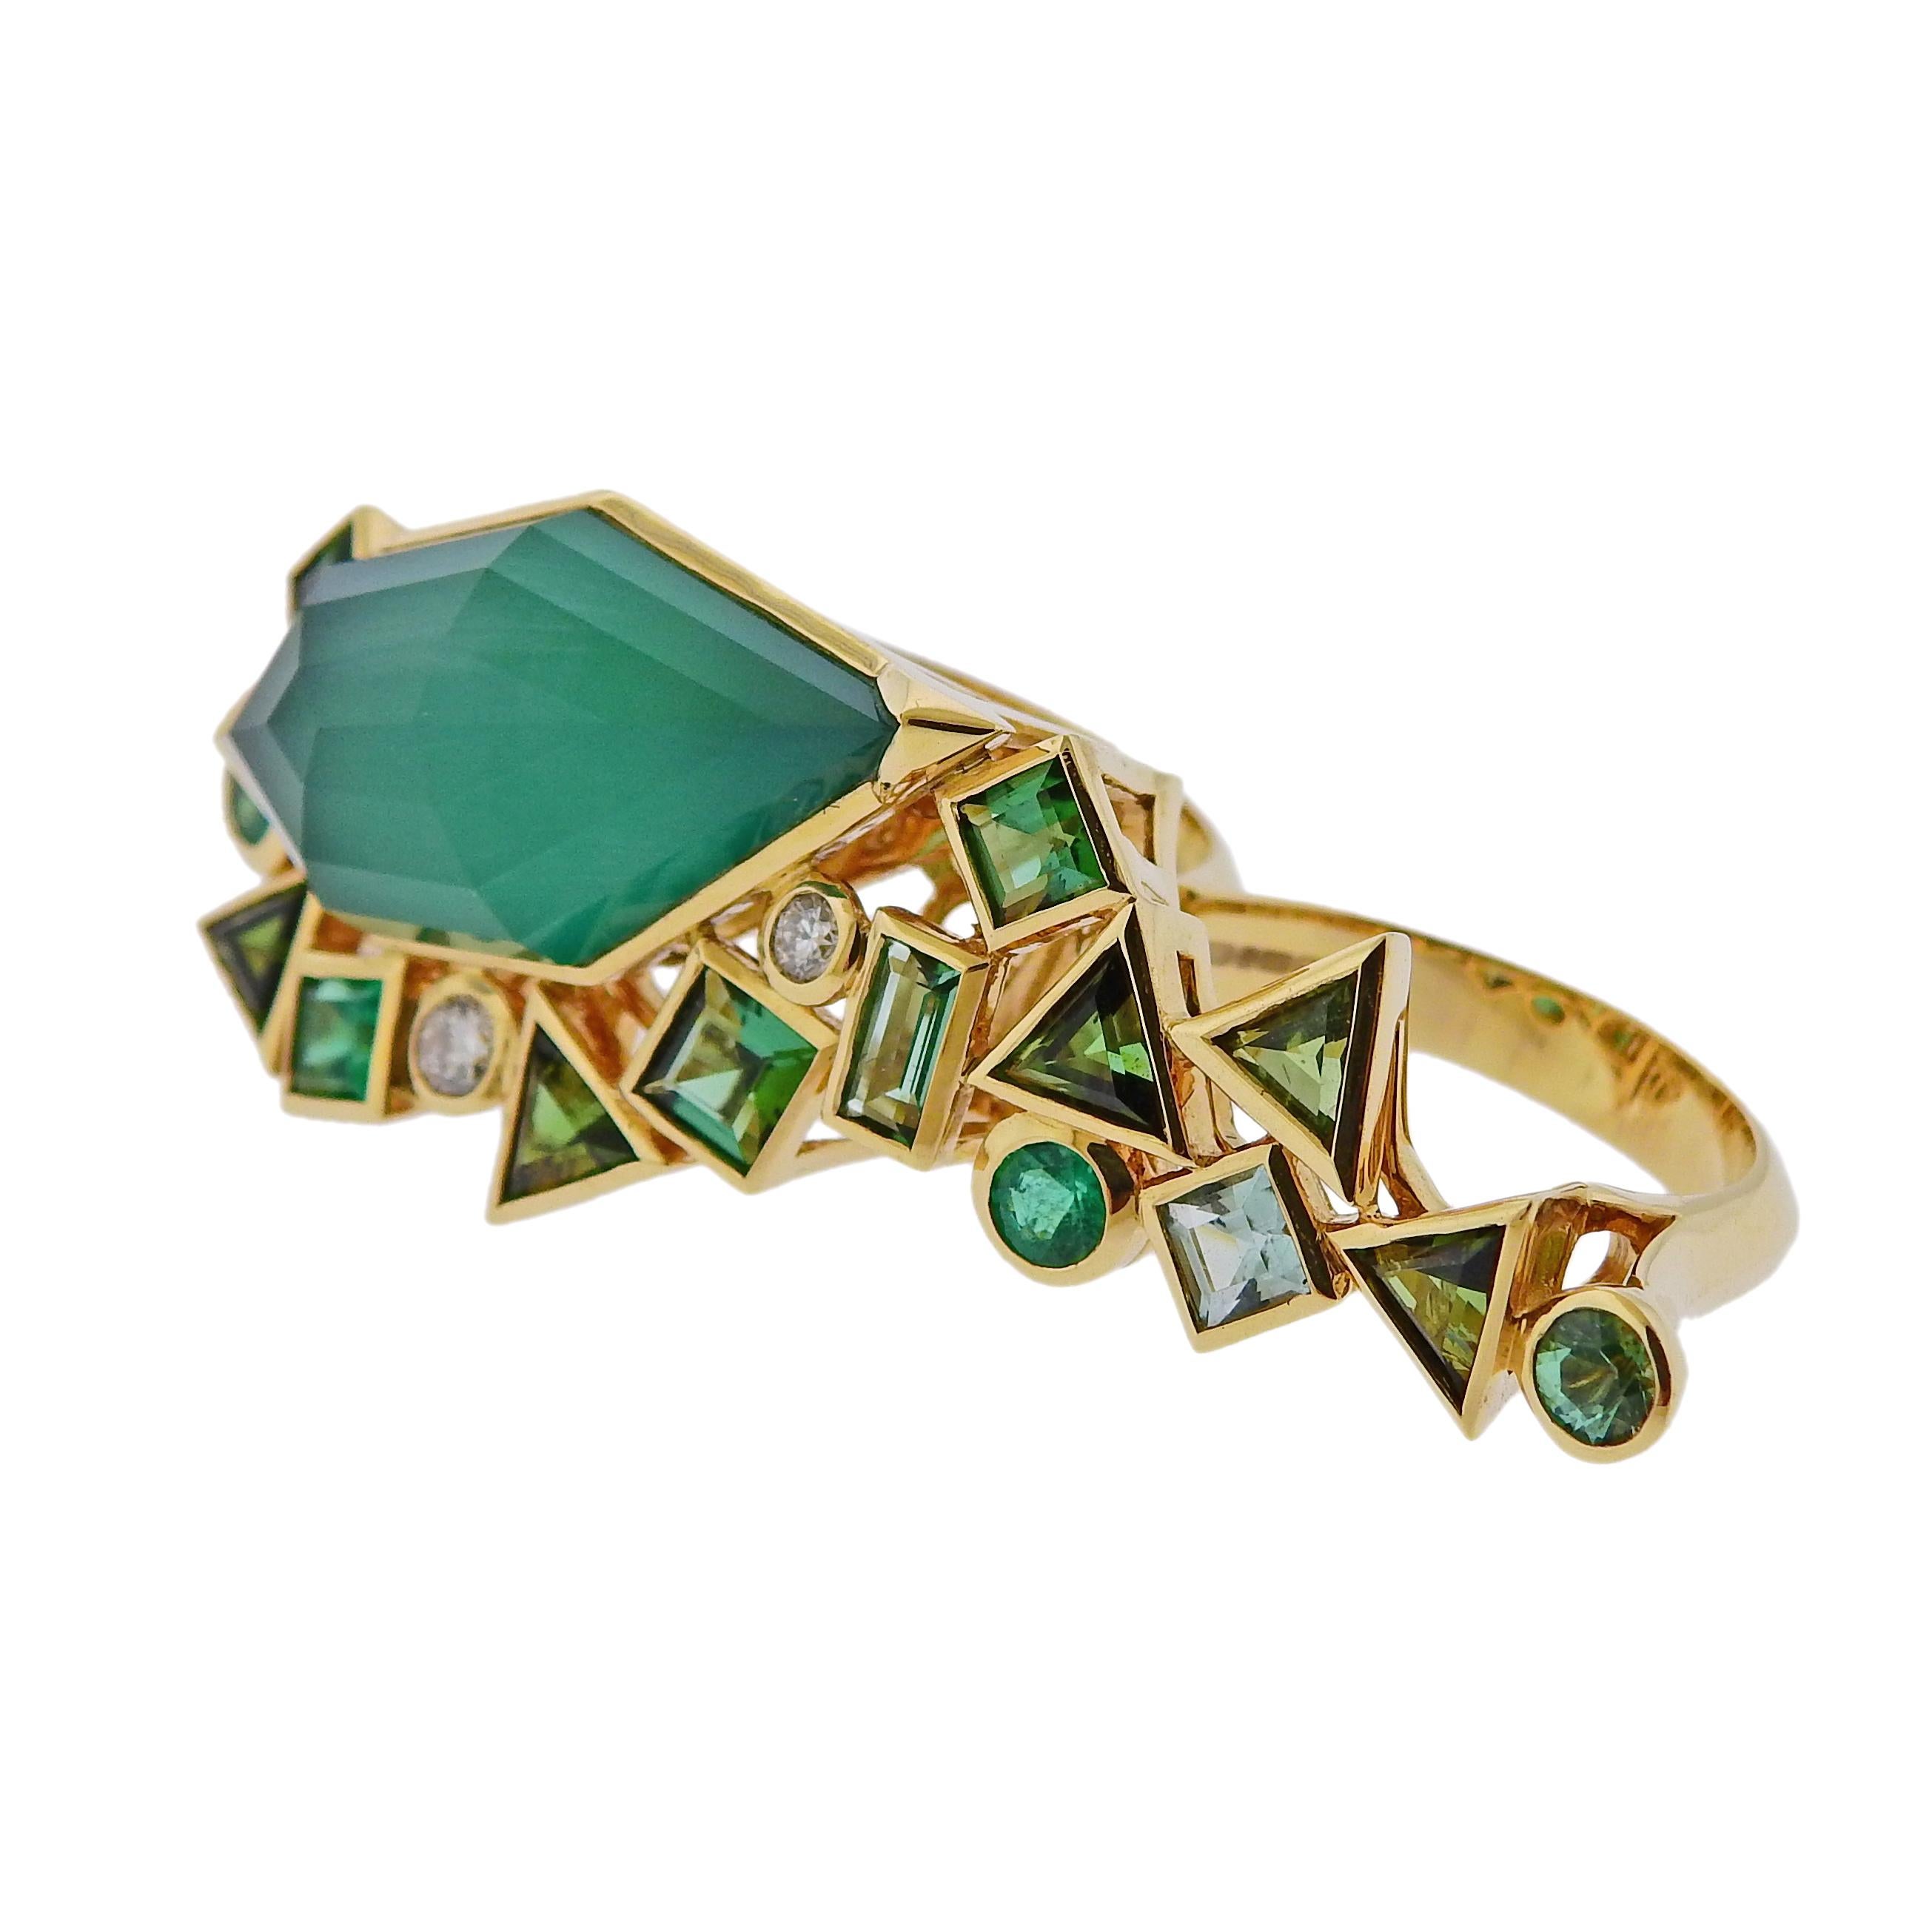 Brand new 18k gold Gold Struck two finger ring by Stephen Webster, set with approx. 0.16ct diamond, green agate, emerald and tourmalines.  Retail $11500. Comes with original packaging.  Ring size - 7 and 6 , top of the ring - 21mm x 49mm. Weight is